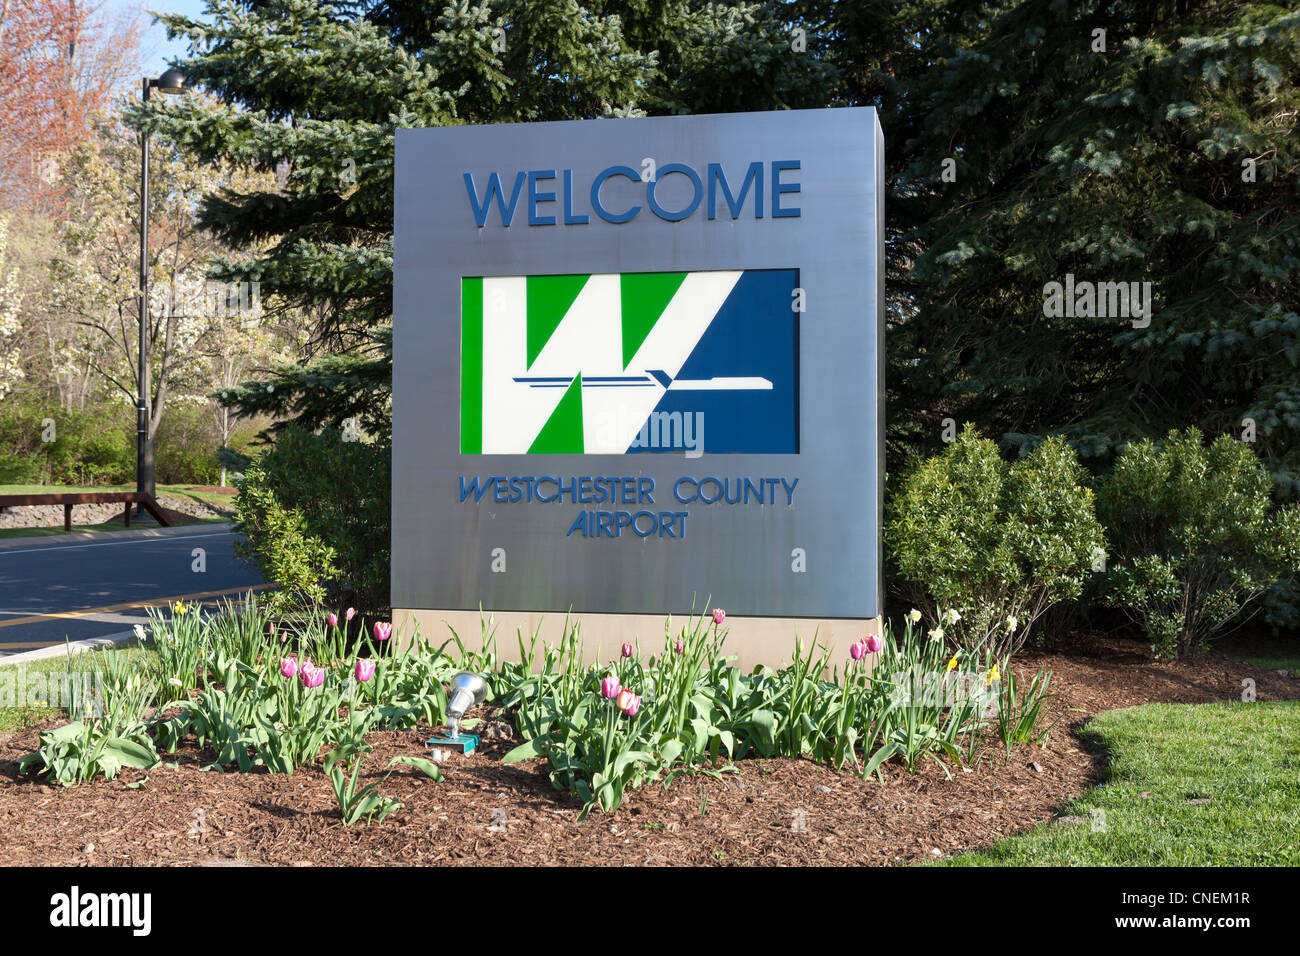 Welcome sign at the entrance to the Westchester County Airport near White Plains, New York Stock Photo